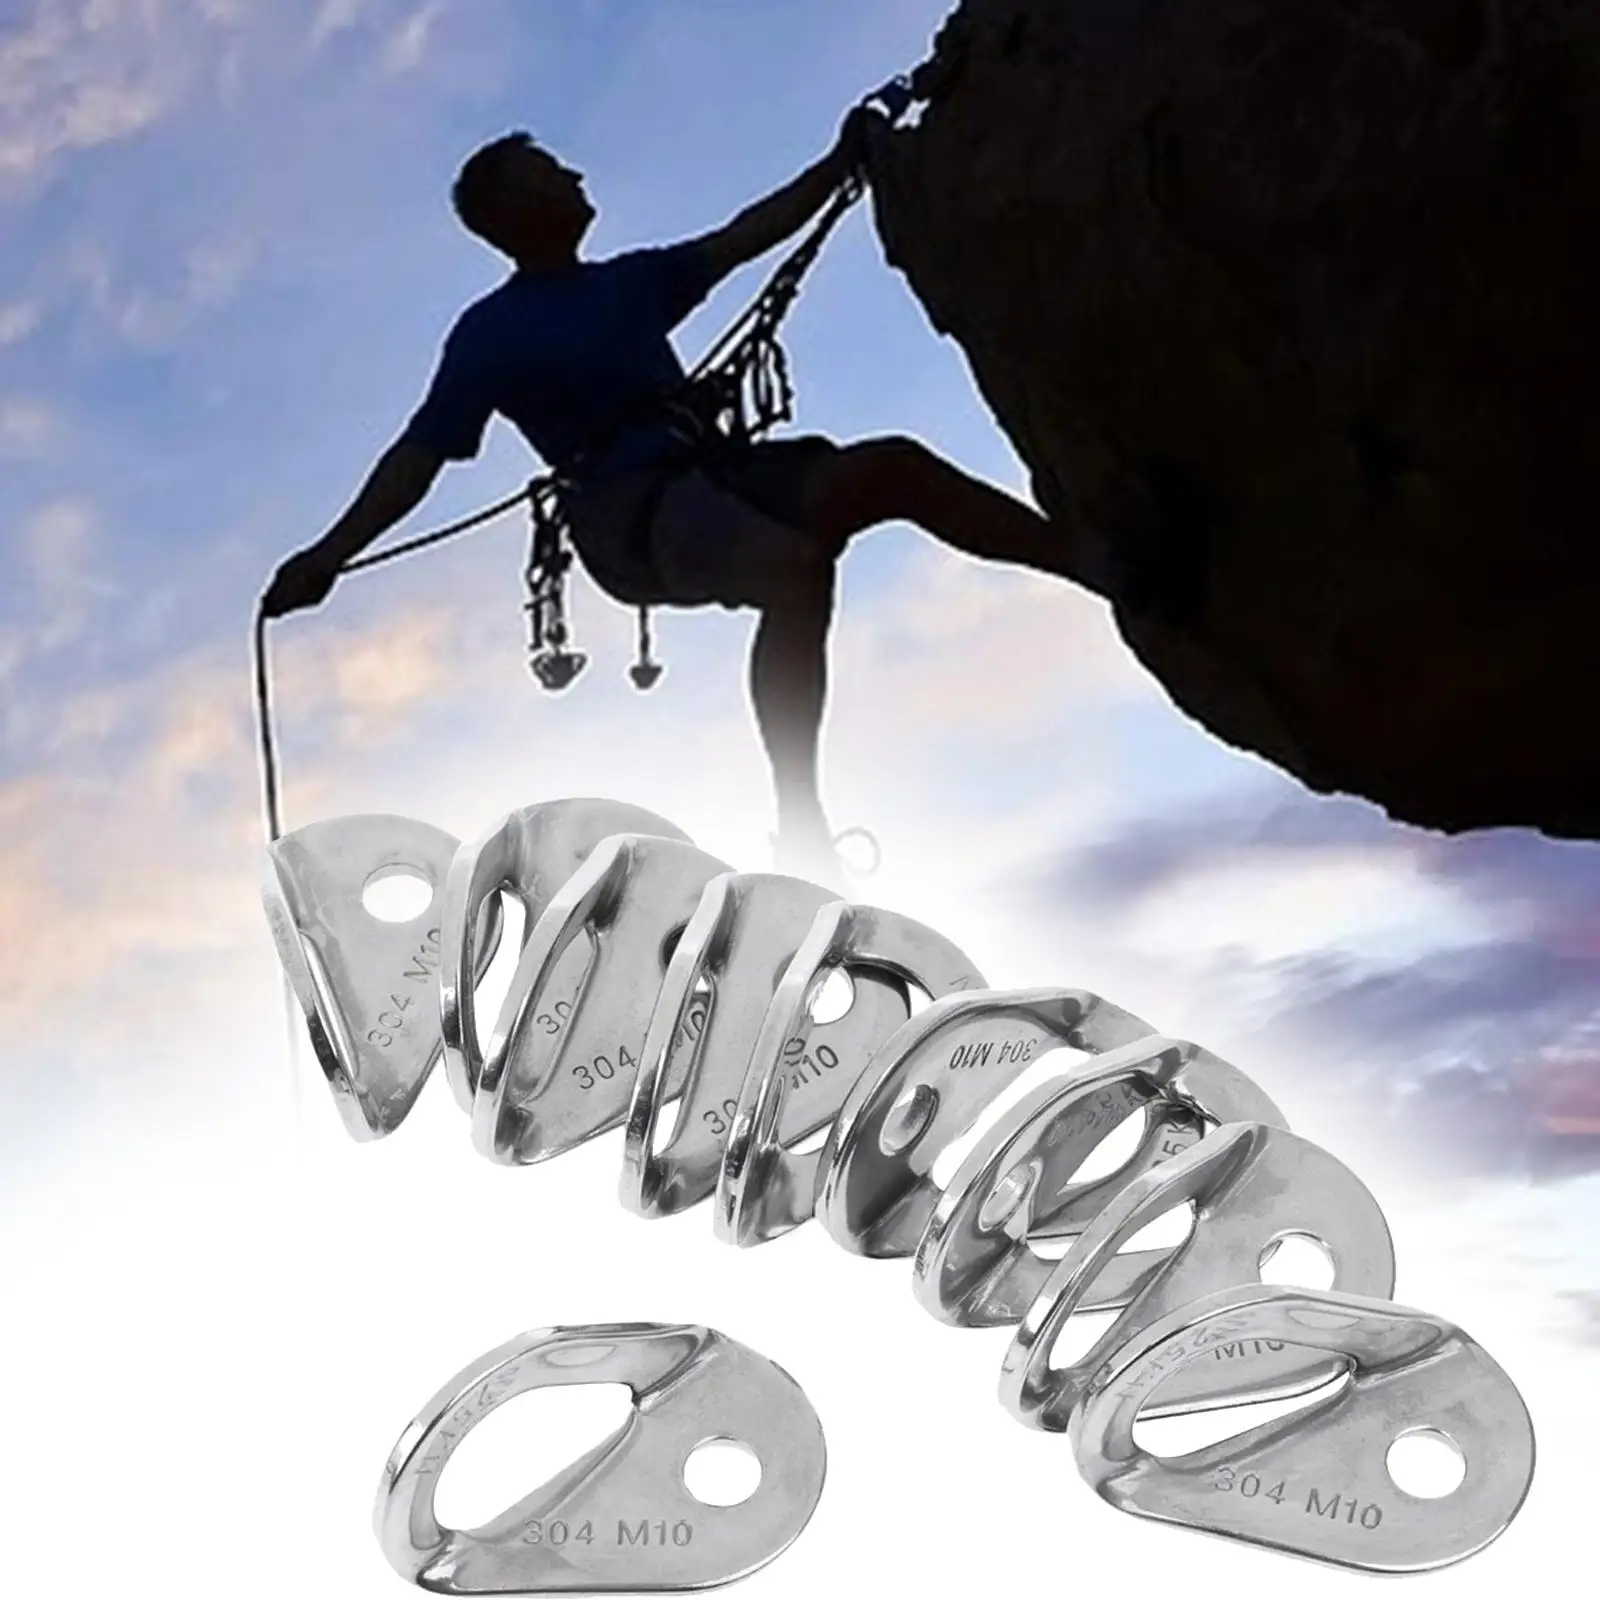 10 Pieces Climbing Anchor Point Nail Hanger Anchor Protection Anchor Plate for Outdoor Belay Engineering Hiking Mountaineering